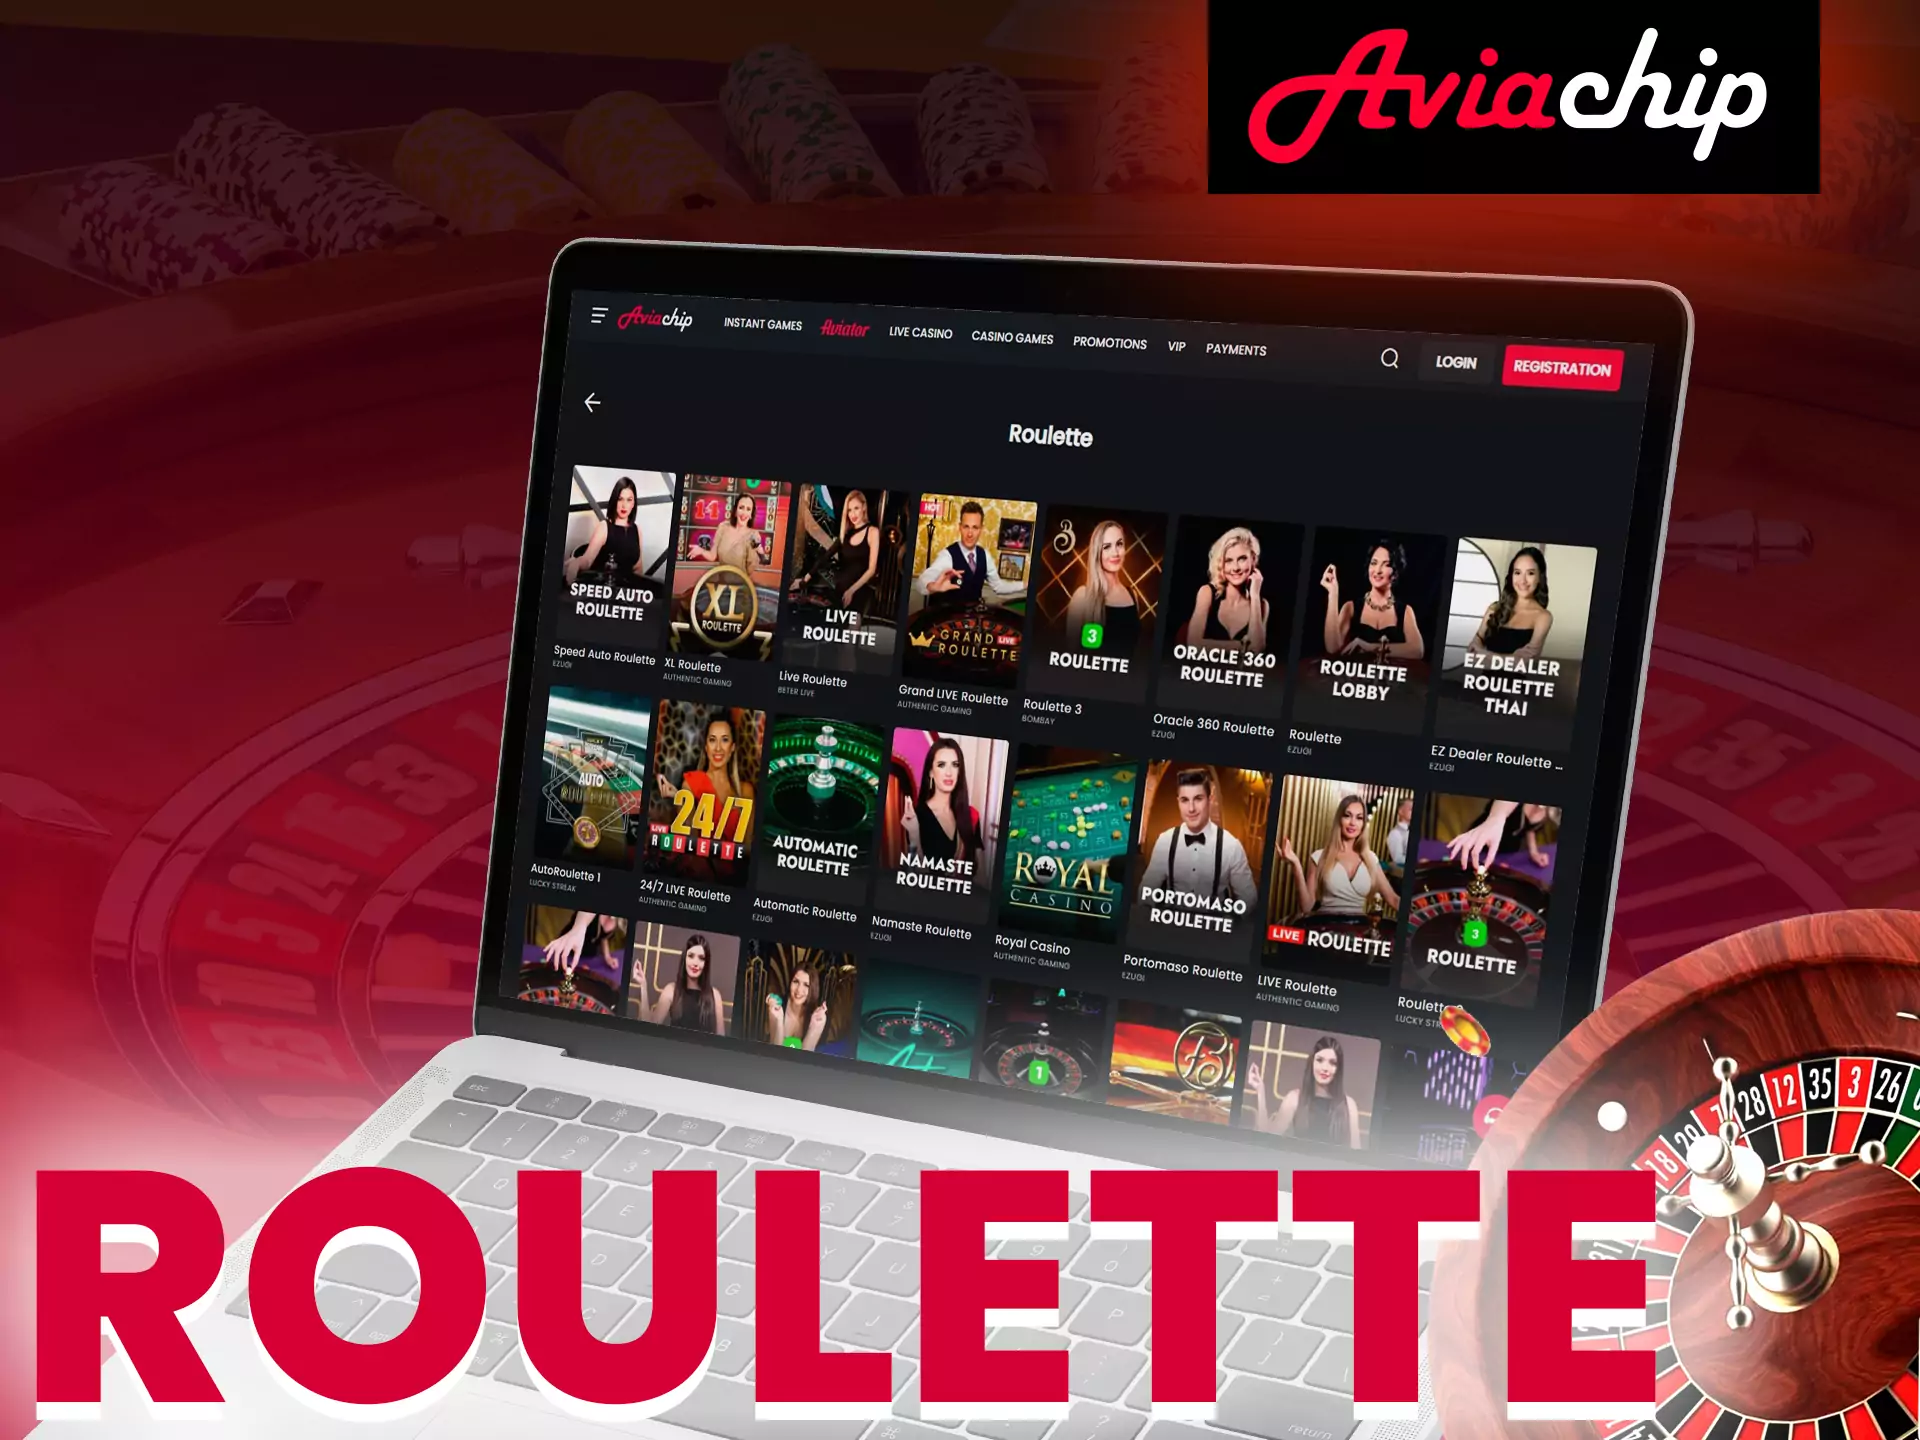 At Aviachip in the casino, try roulette.